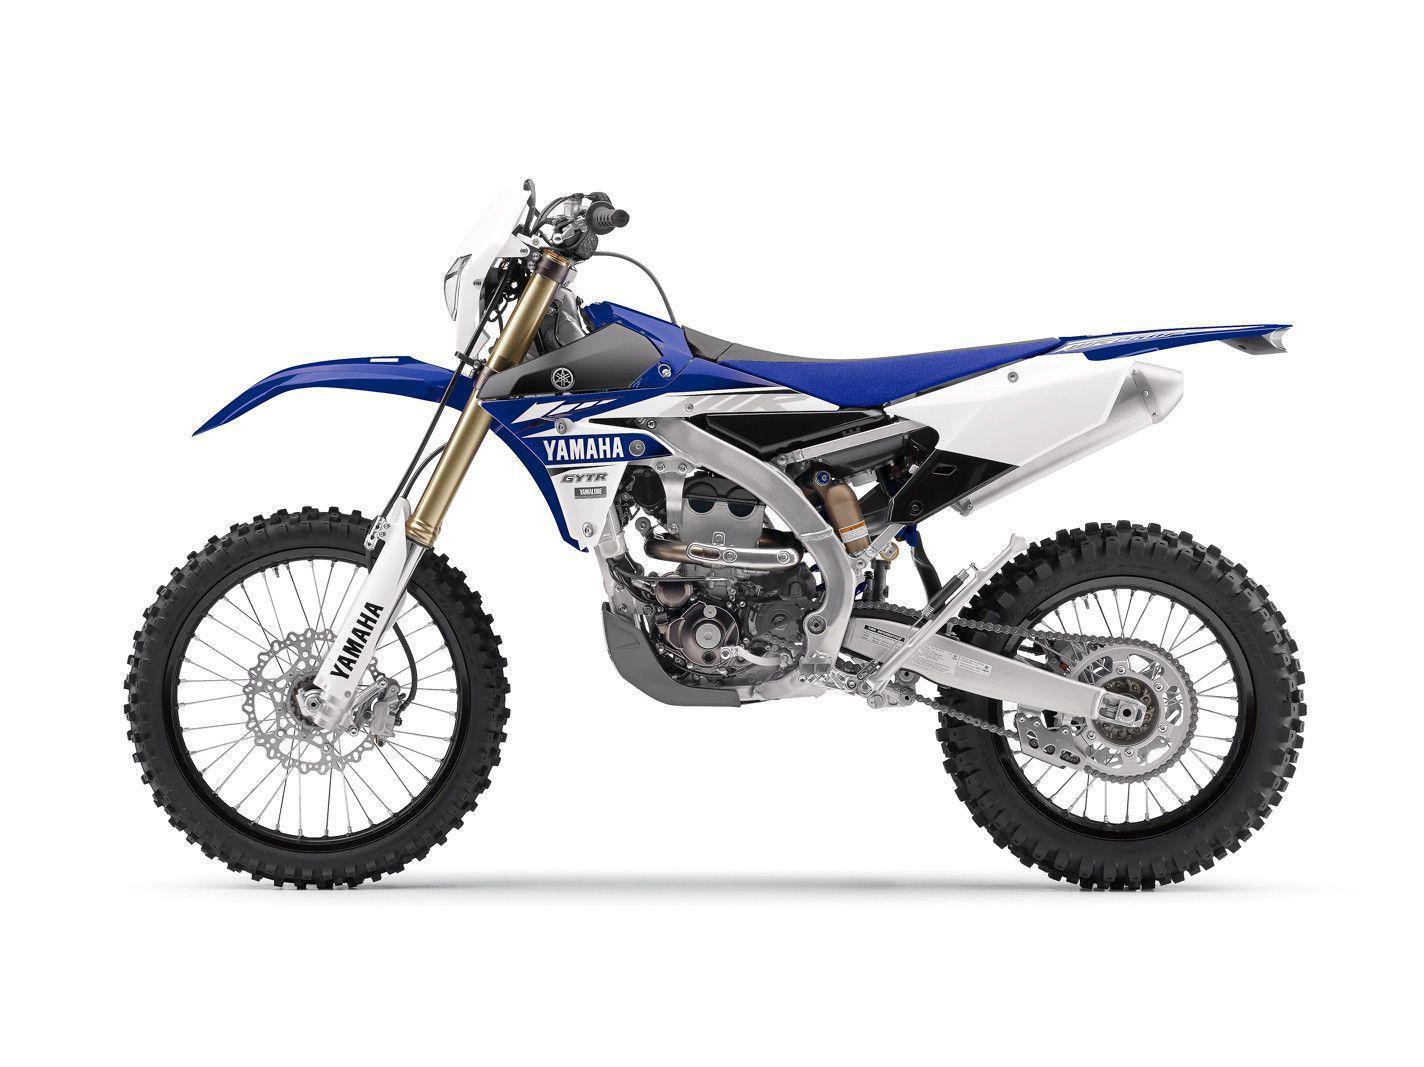 First Look: 2017 Yamaha Motocross And Off Road Models